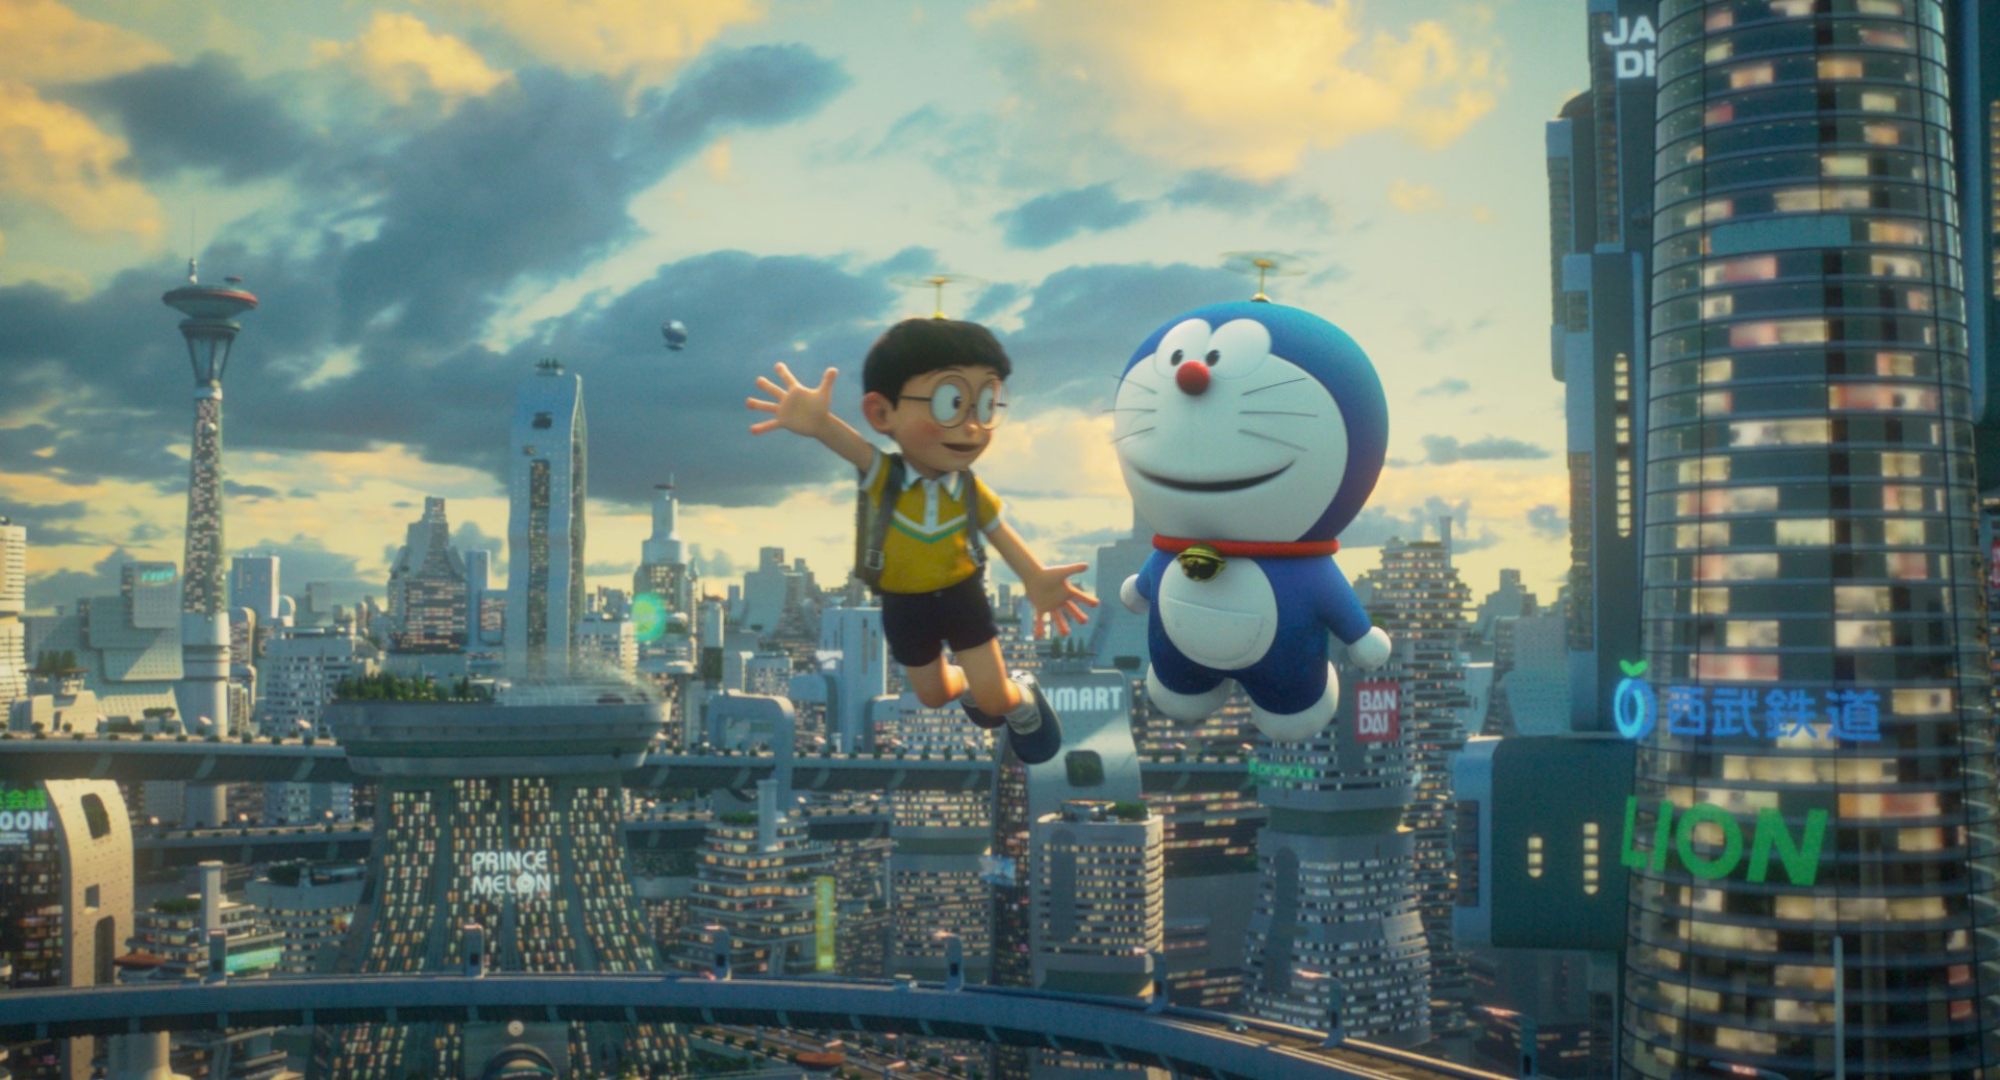 Stand By Me Doraemon 2 Movie Review Nobita Shizuka Finally Get Married In Entertaining Animated Sequel South China Morning Post